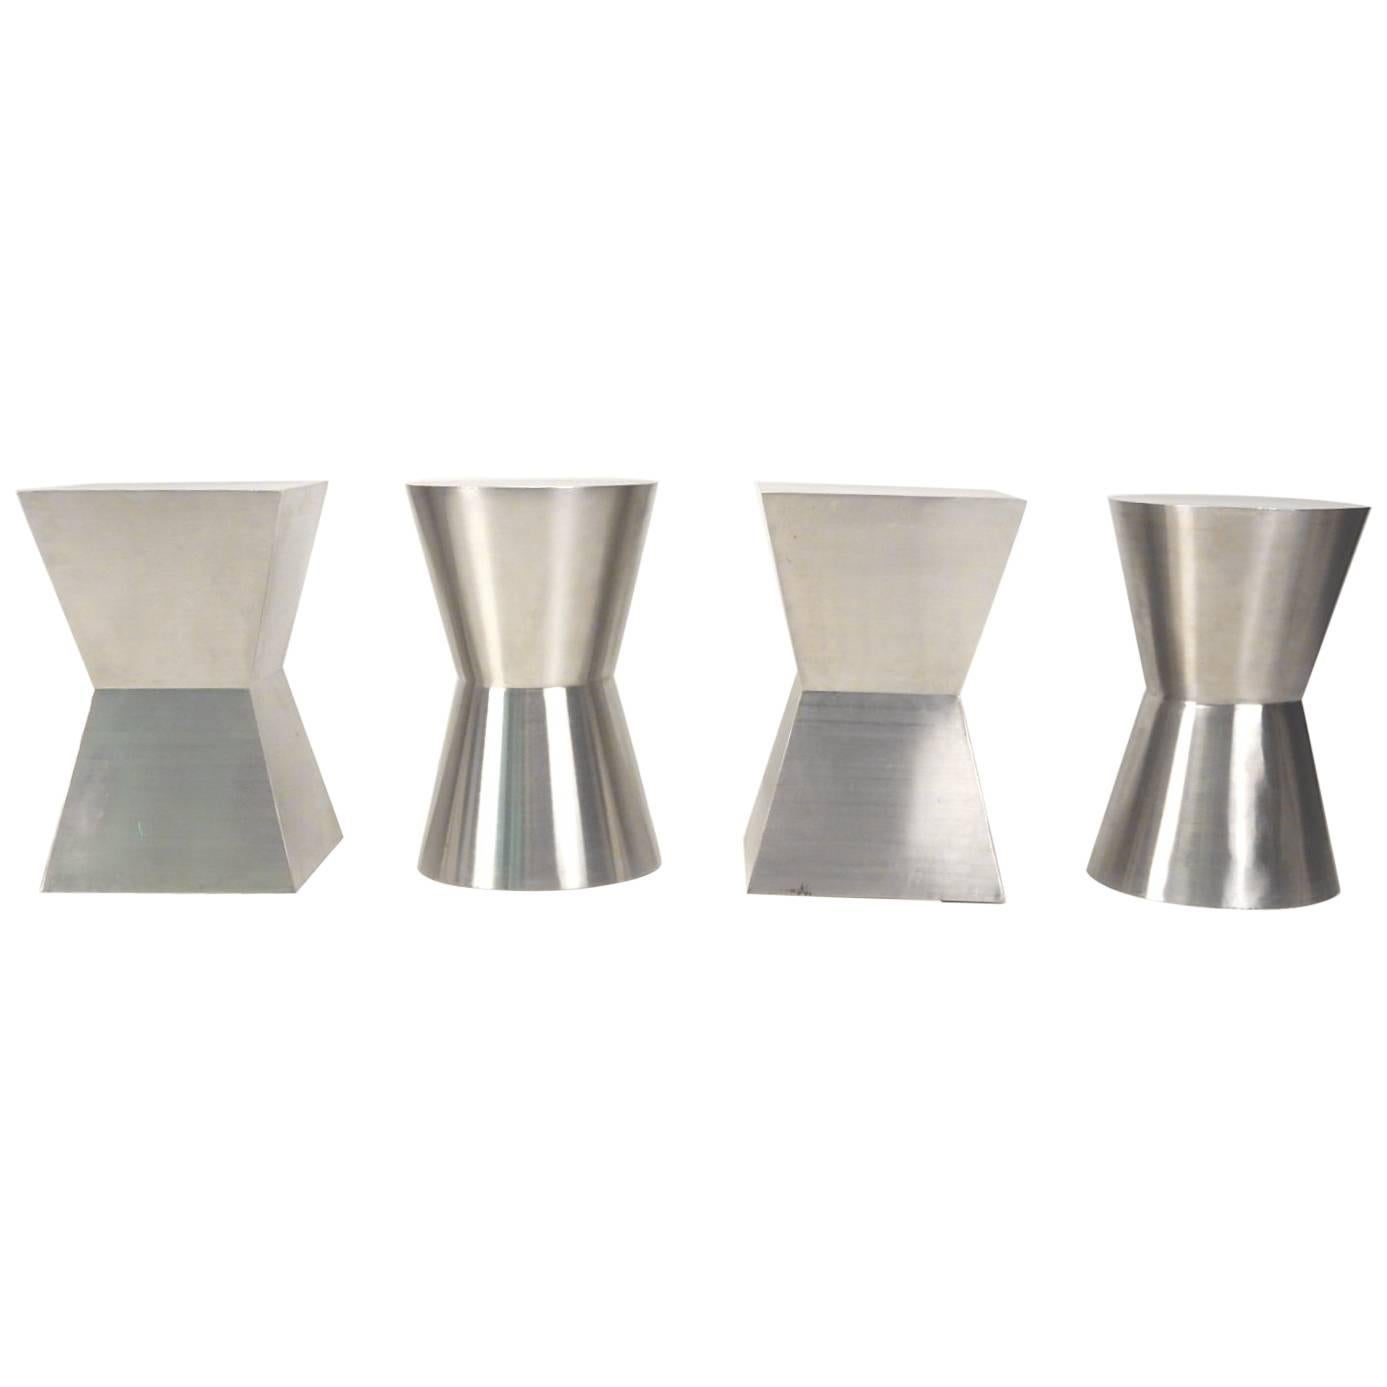 Custom Stainless Steel Geometric Stools or Tables, Set of Four